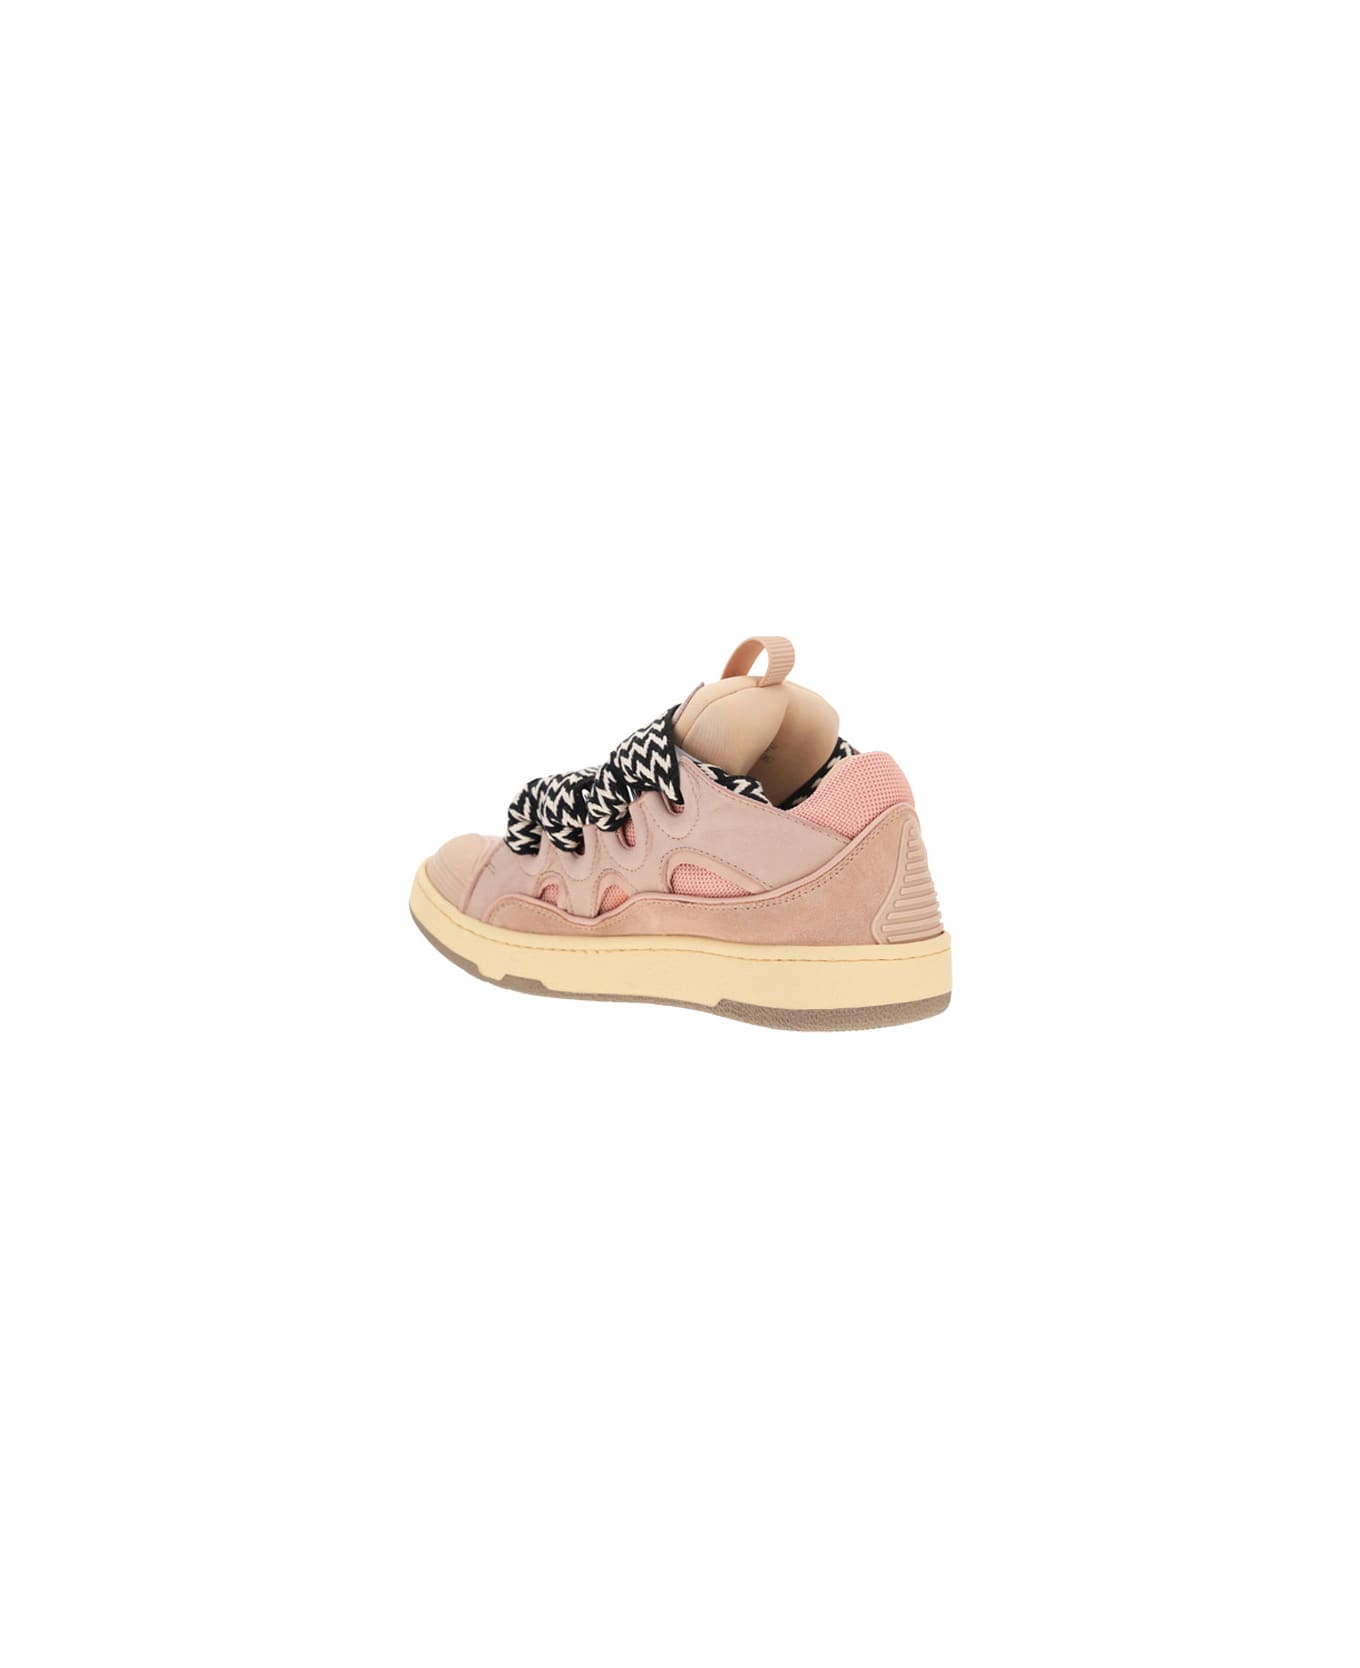 Lanvin Curb Sneakers In Pink Leather - Pale Pink スニーカー